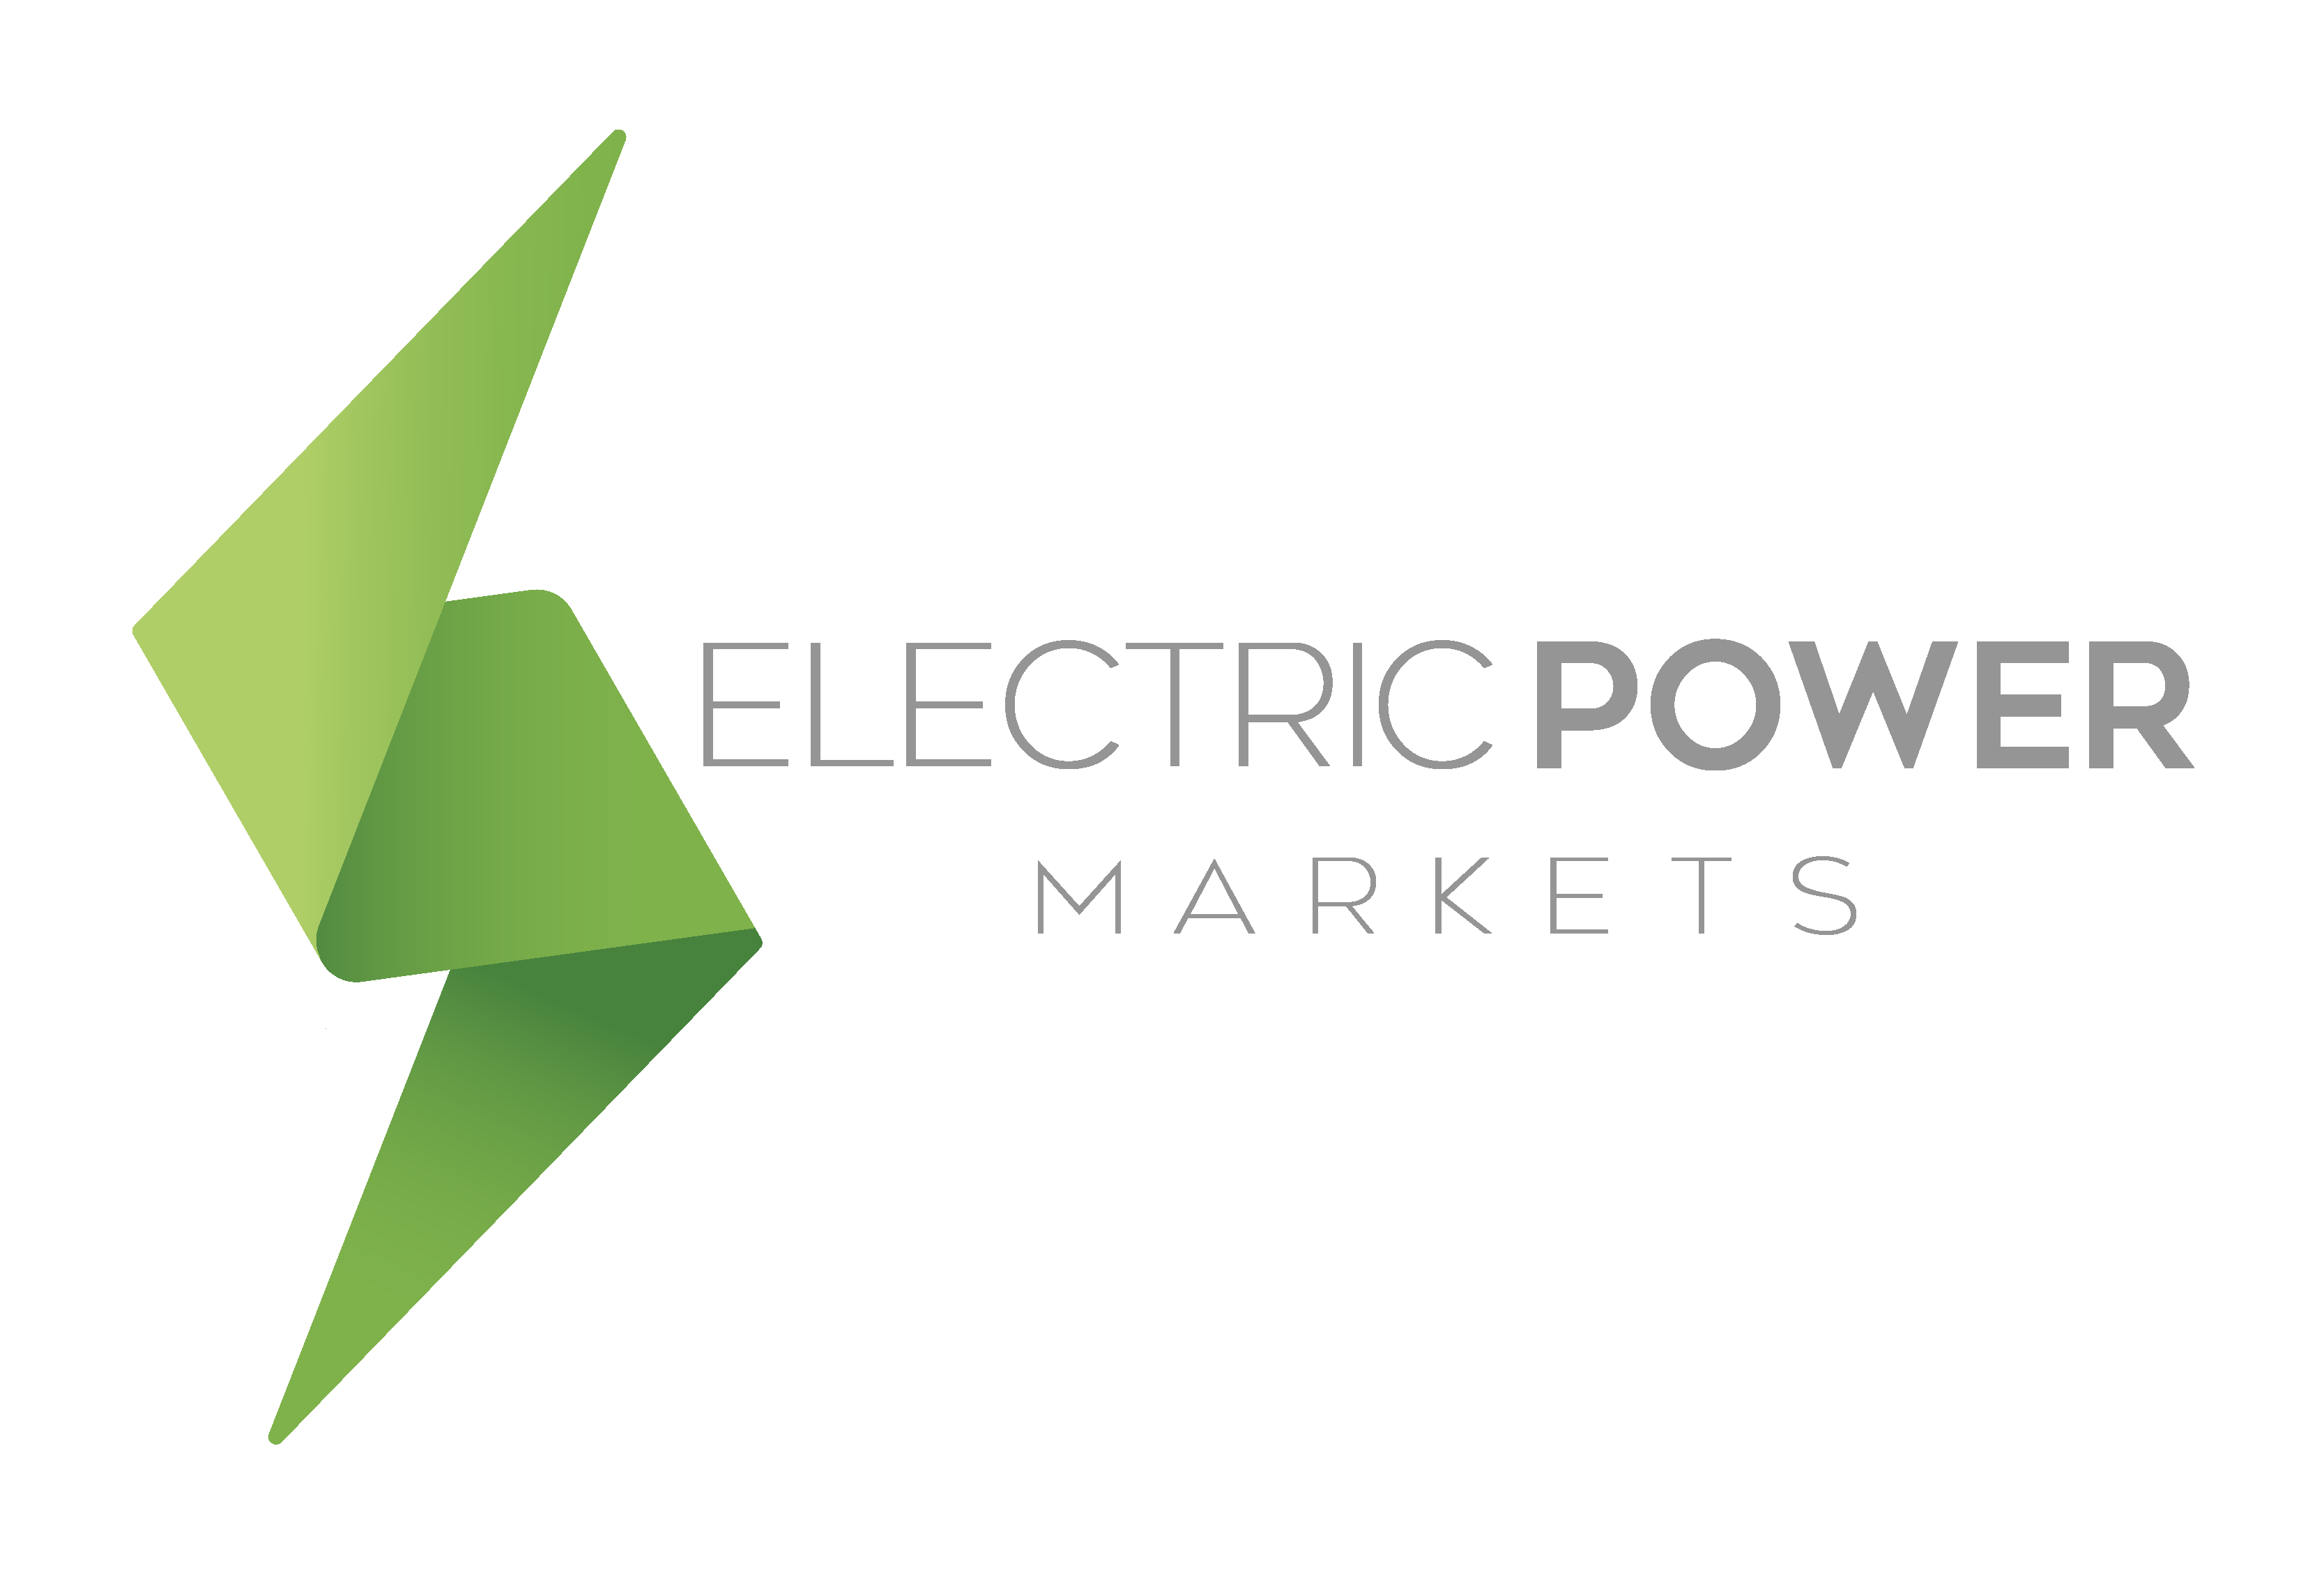 Electric Power Markets